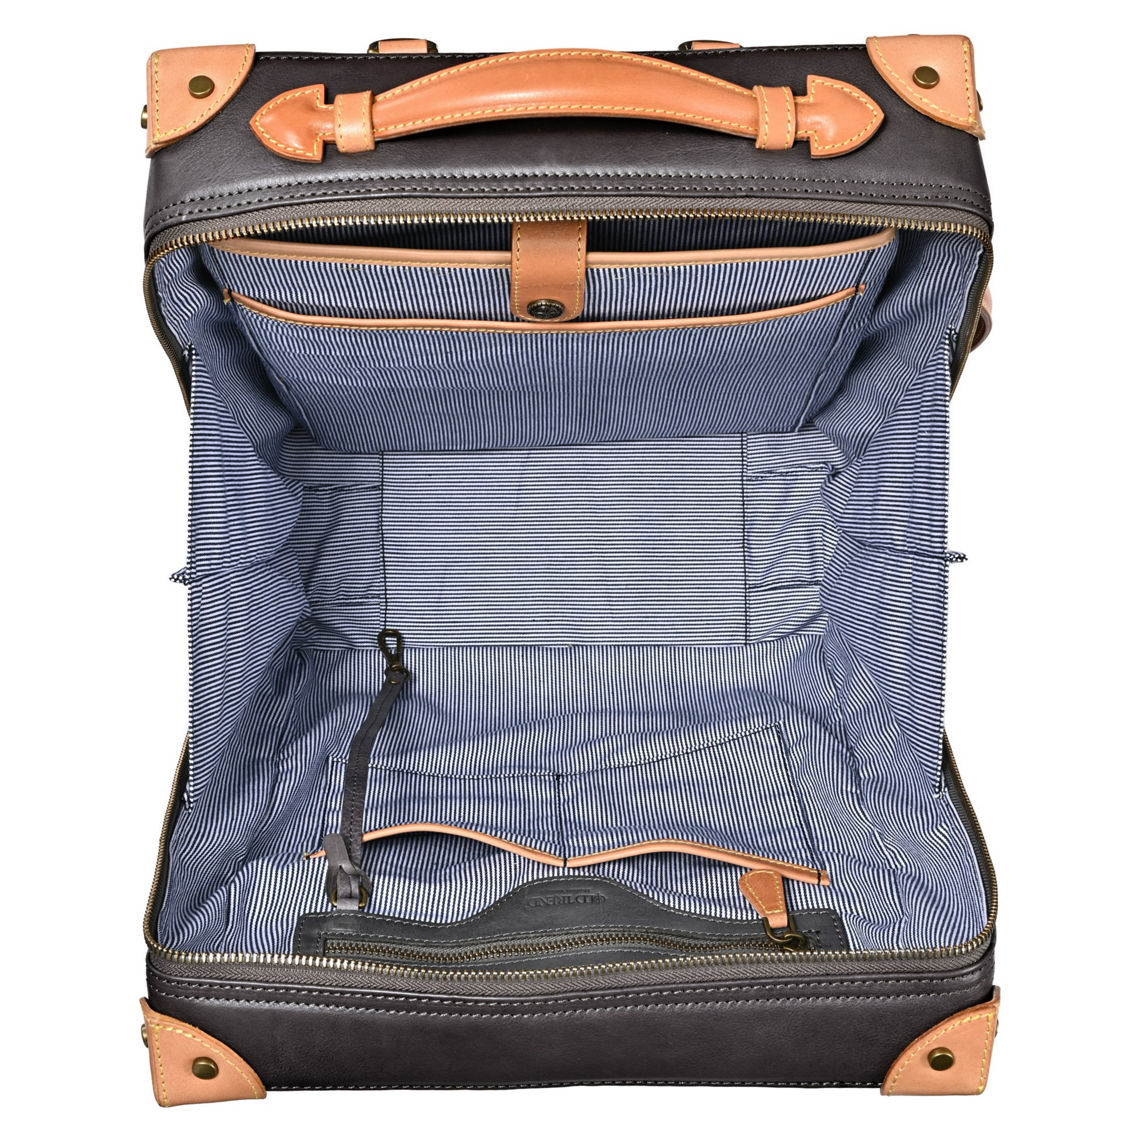 Old Trend Speedwell Trunk Leather Backpack - Image 3 of 5